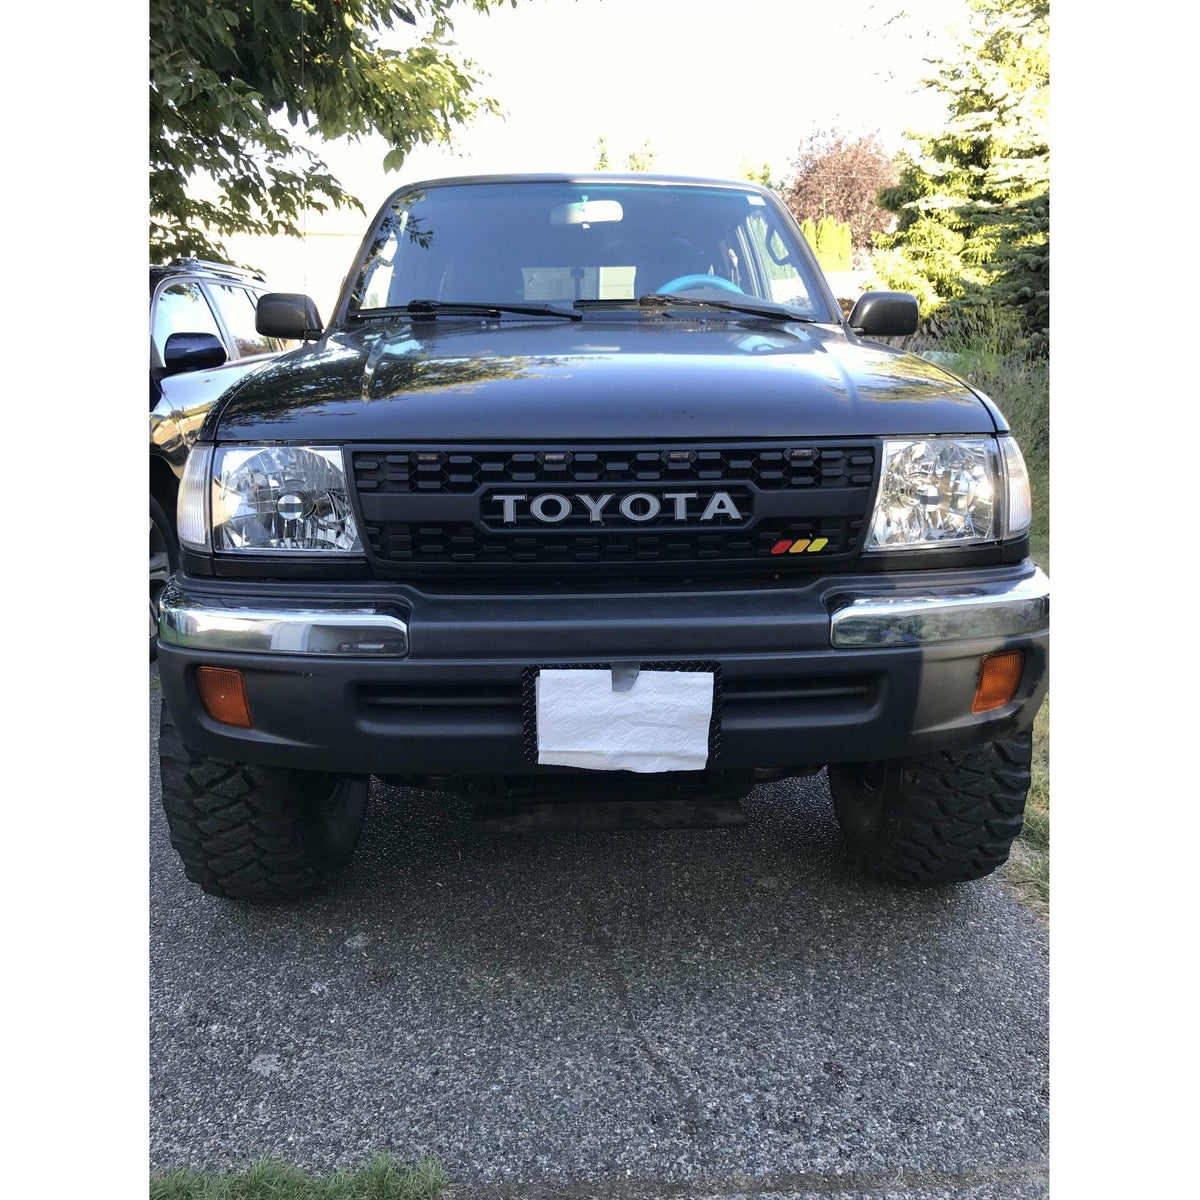 1997-2000 Toyota Tacoma | TRD Pro Style Grille - Truck Accessories Guy